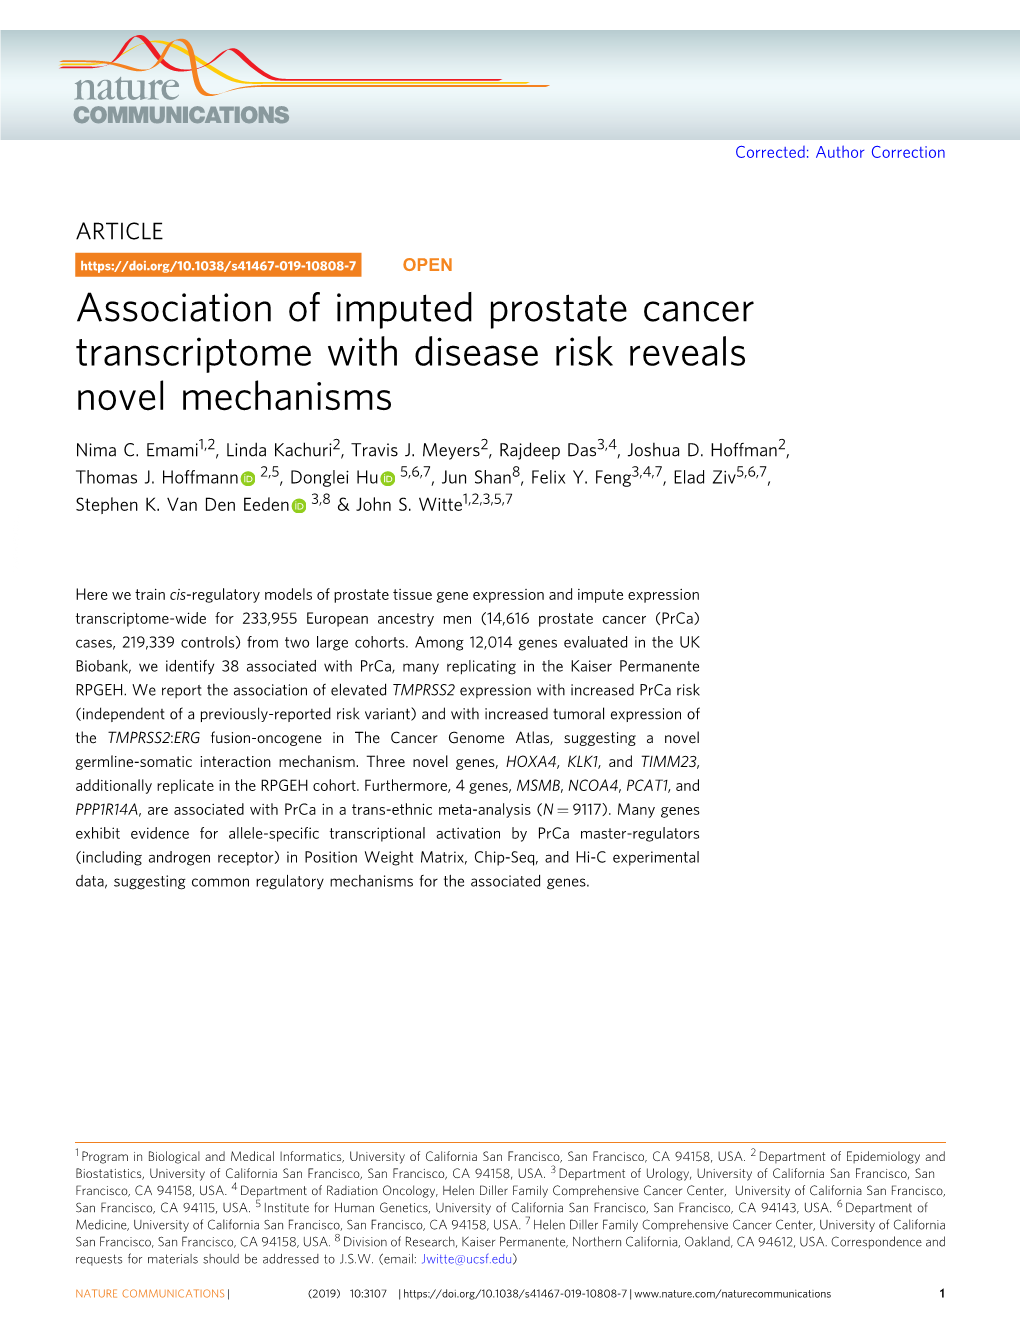 Association of Imputed Prostate Cancer Transcriptome with Disease Risk Reveals Novel Mechanisms